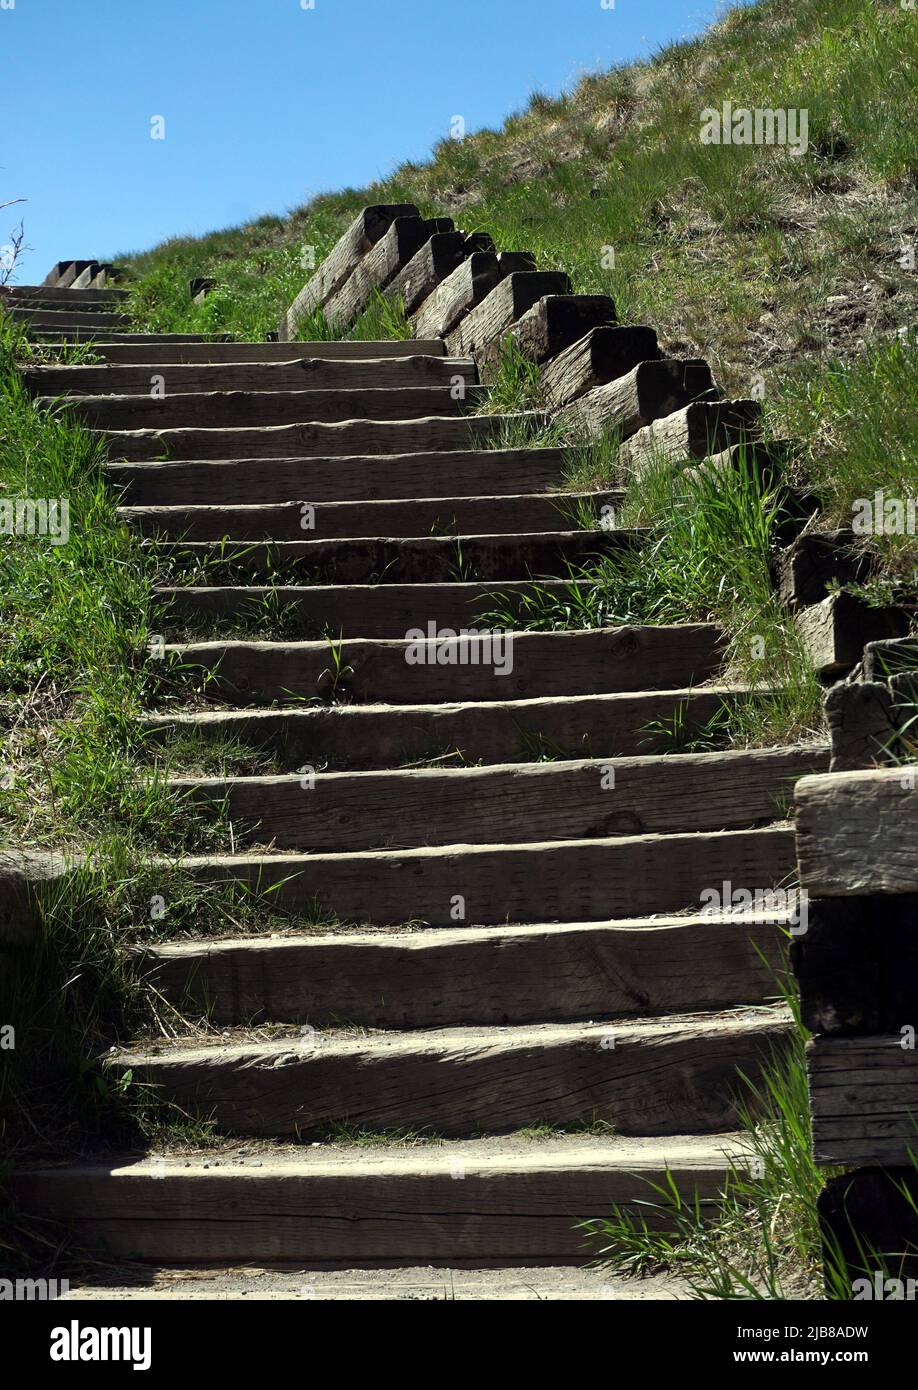 Wooden steps leading to the Crows Nest River, Southern Alberta Stock Photo